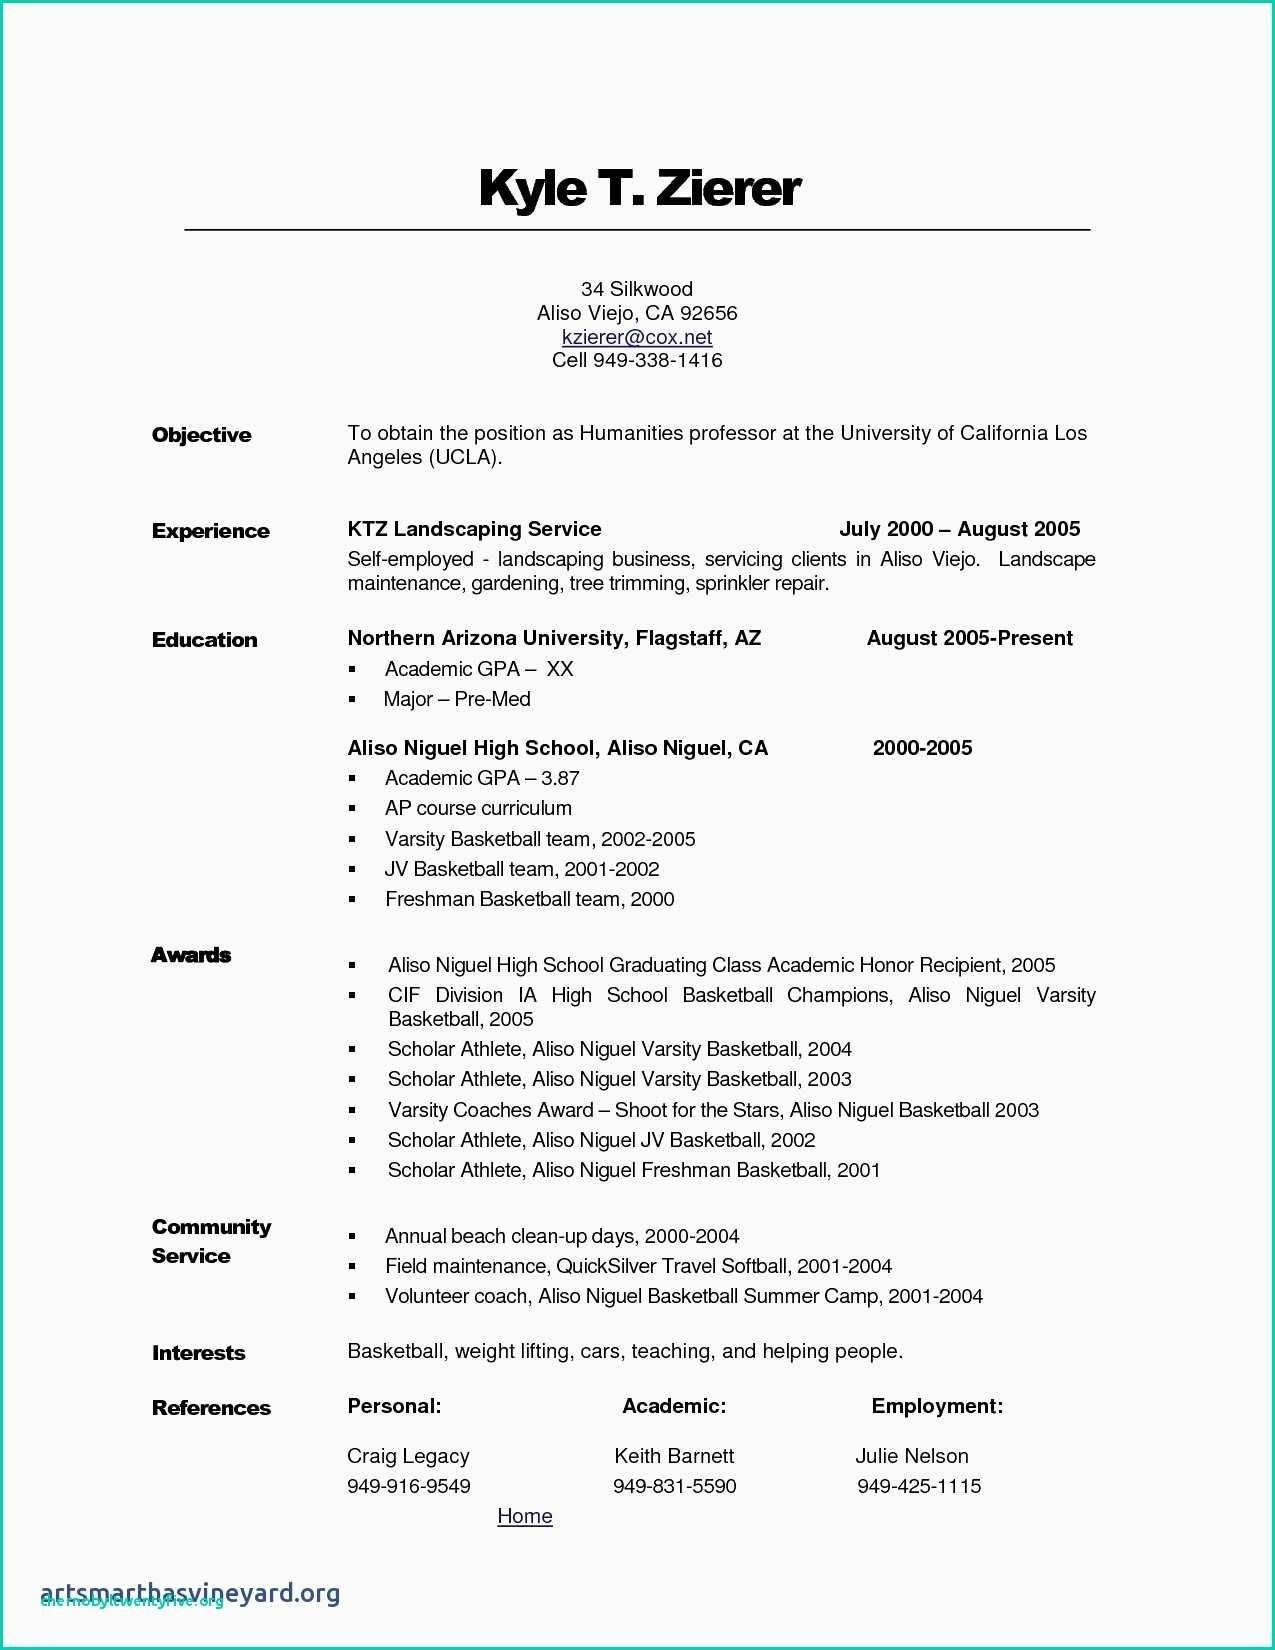 Resume Objective Sample for Summer Job Objective In A Resume Karate, Job, Statements